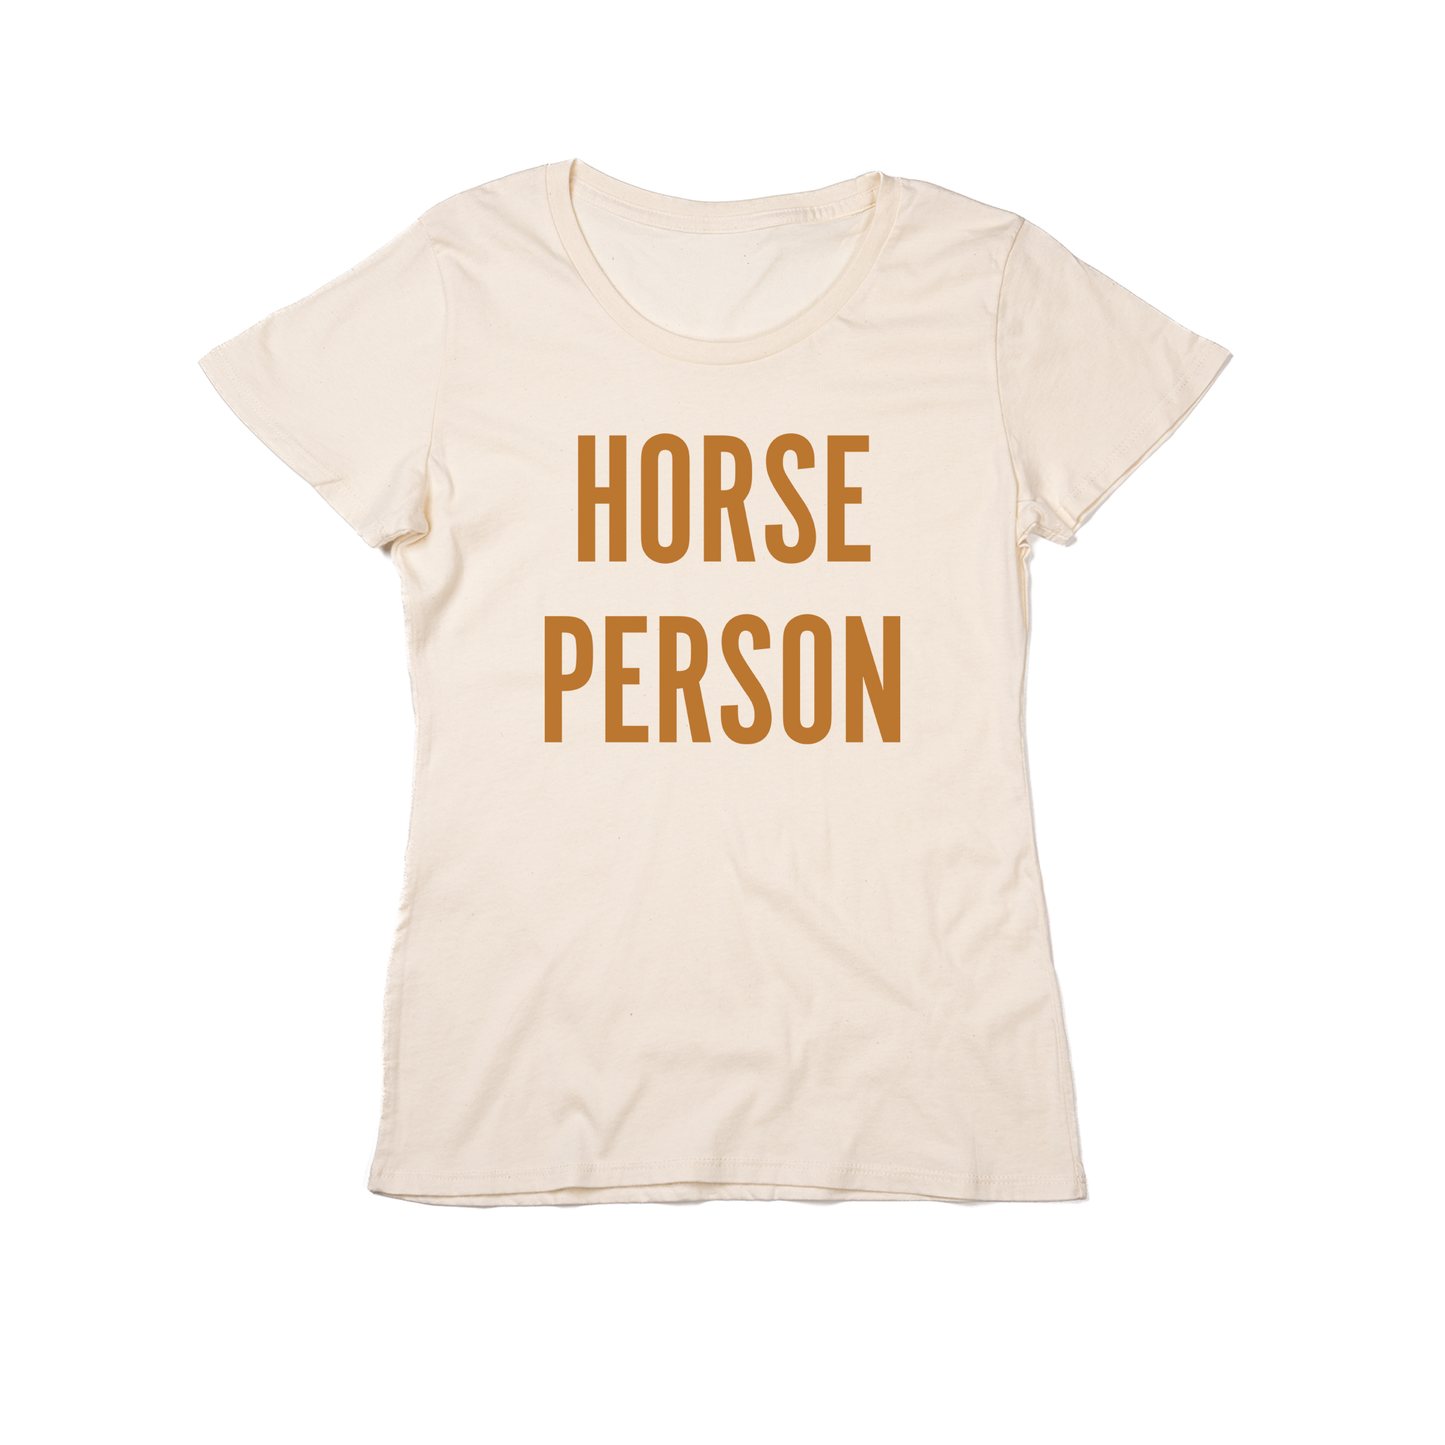 Horse Person (Camel) - Women's Fitted Tee (Natural)